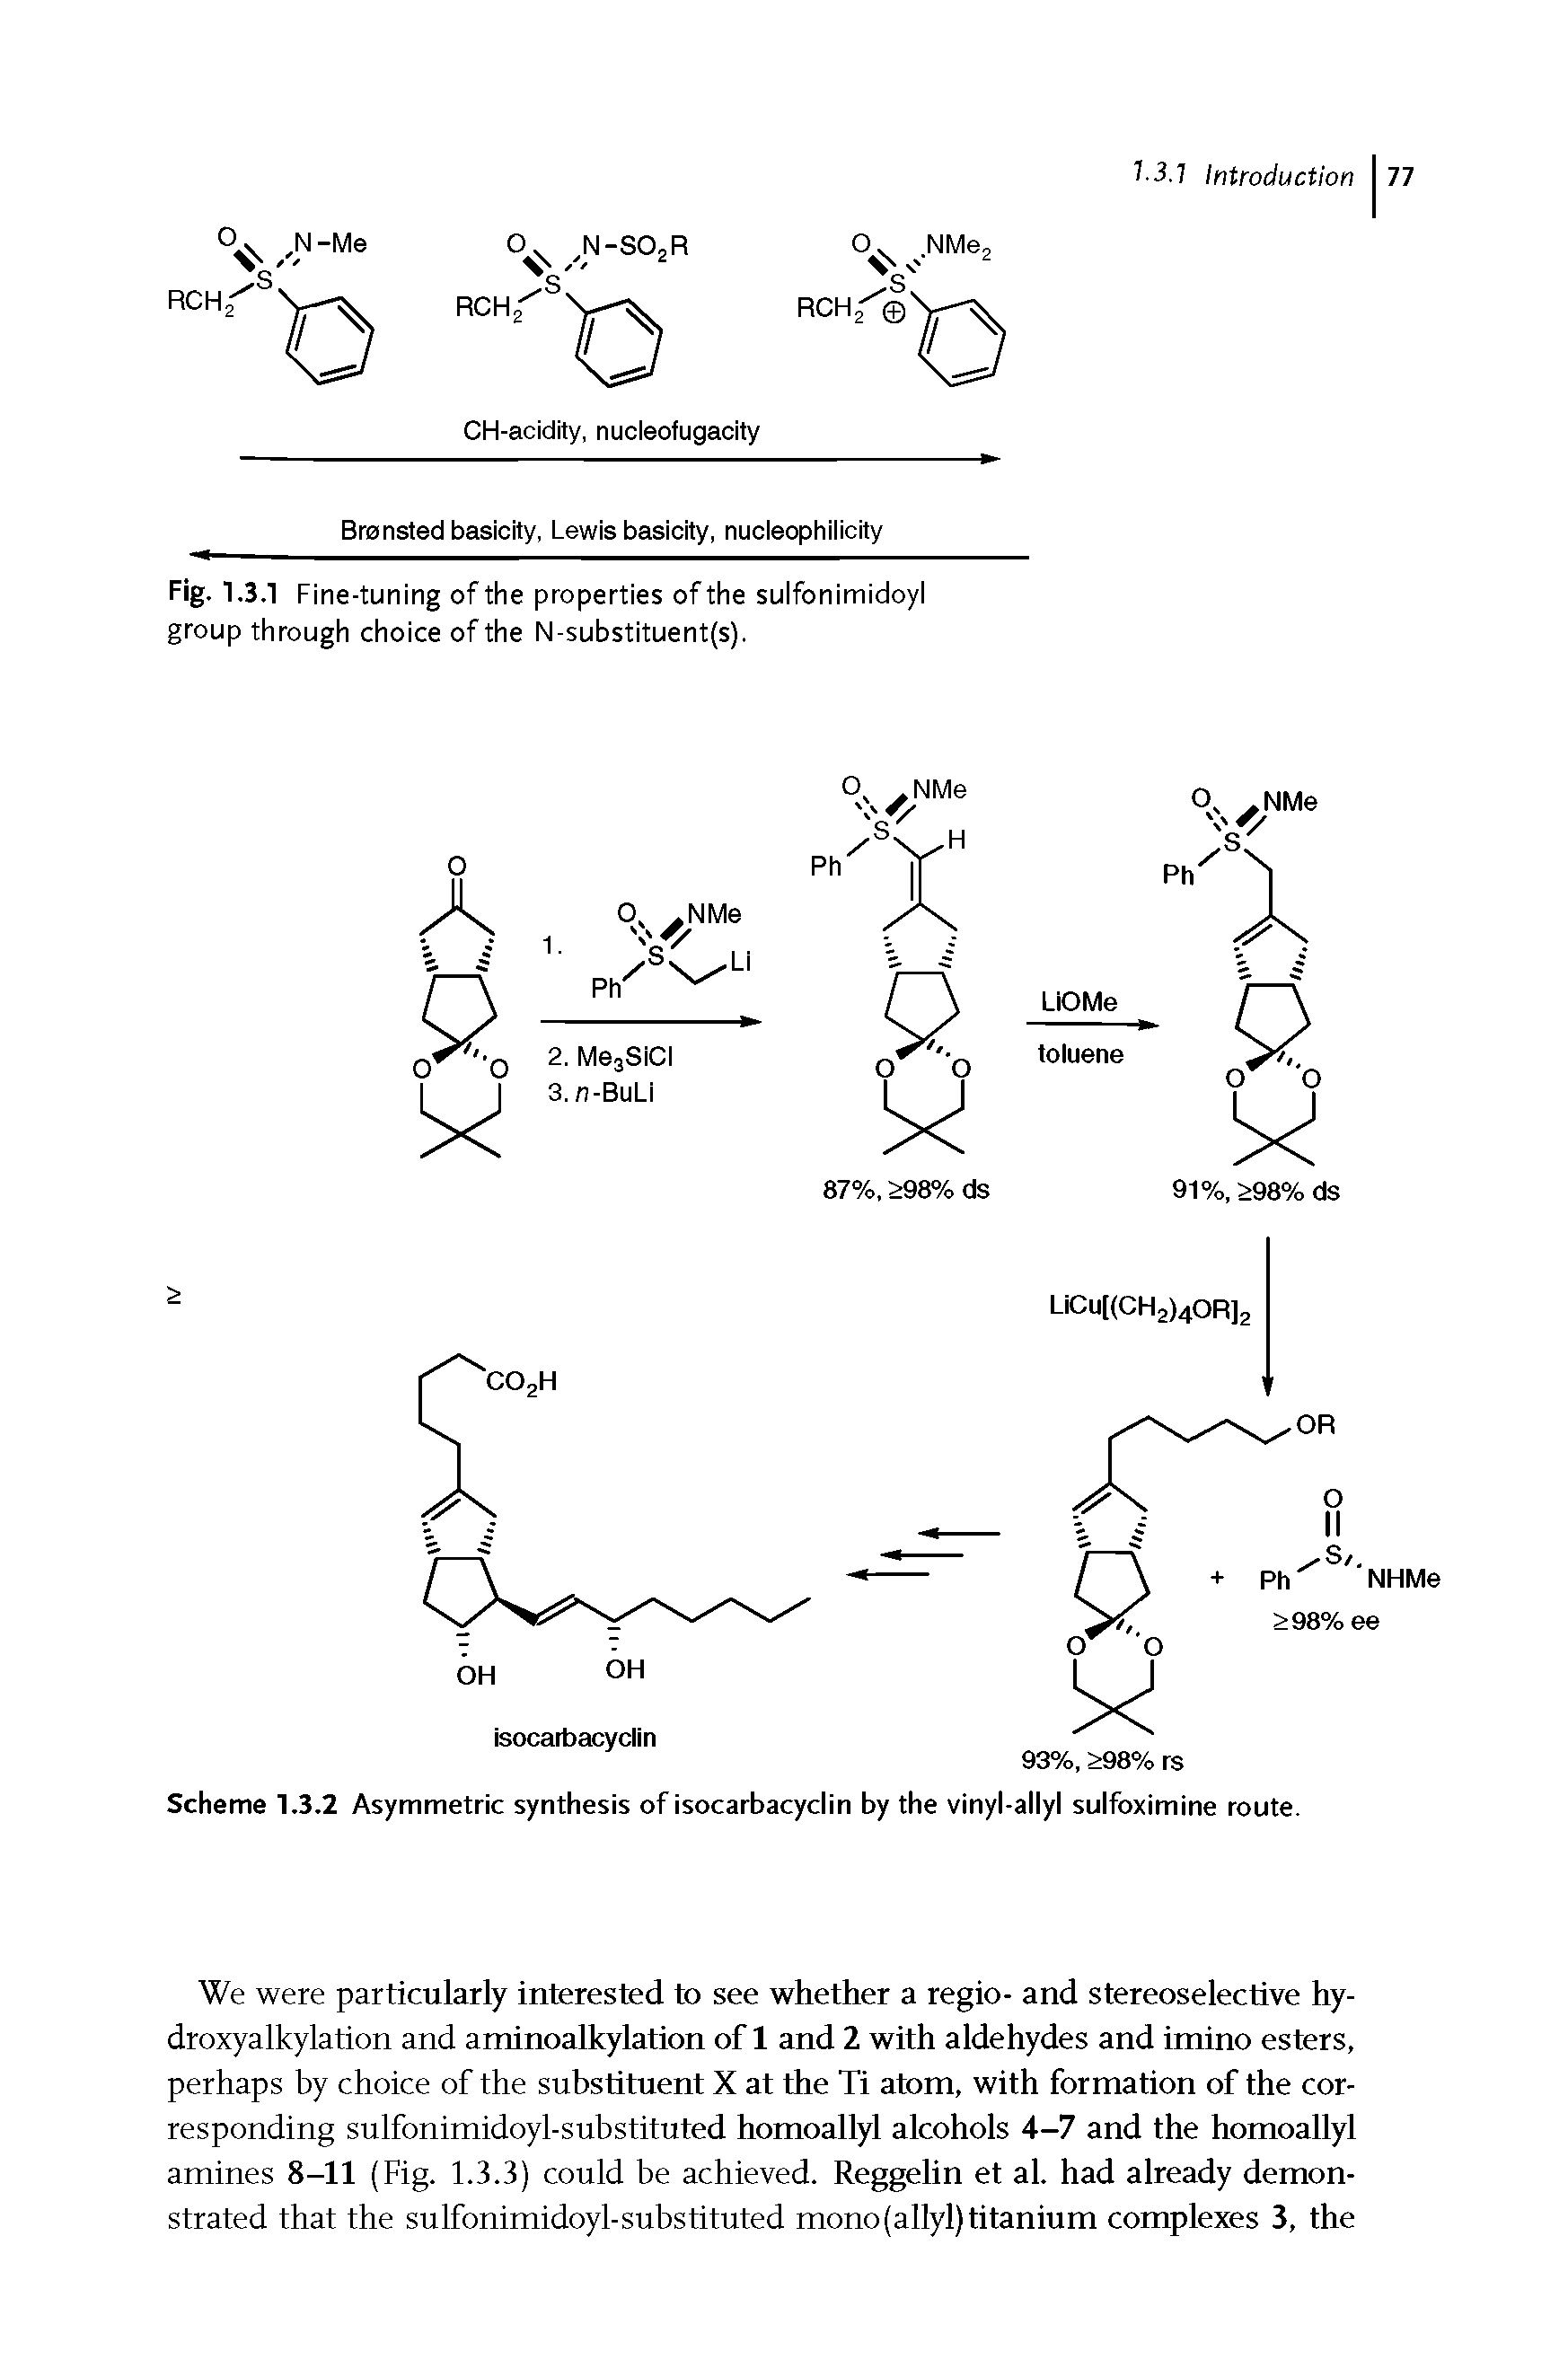 Fig. 1.3.1 Fine-tuning of the properties of the sulfonimidoyl group through choice of the N-substituent(s).